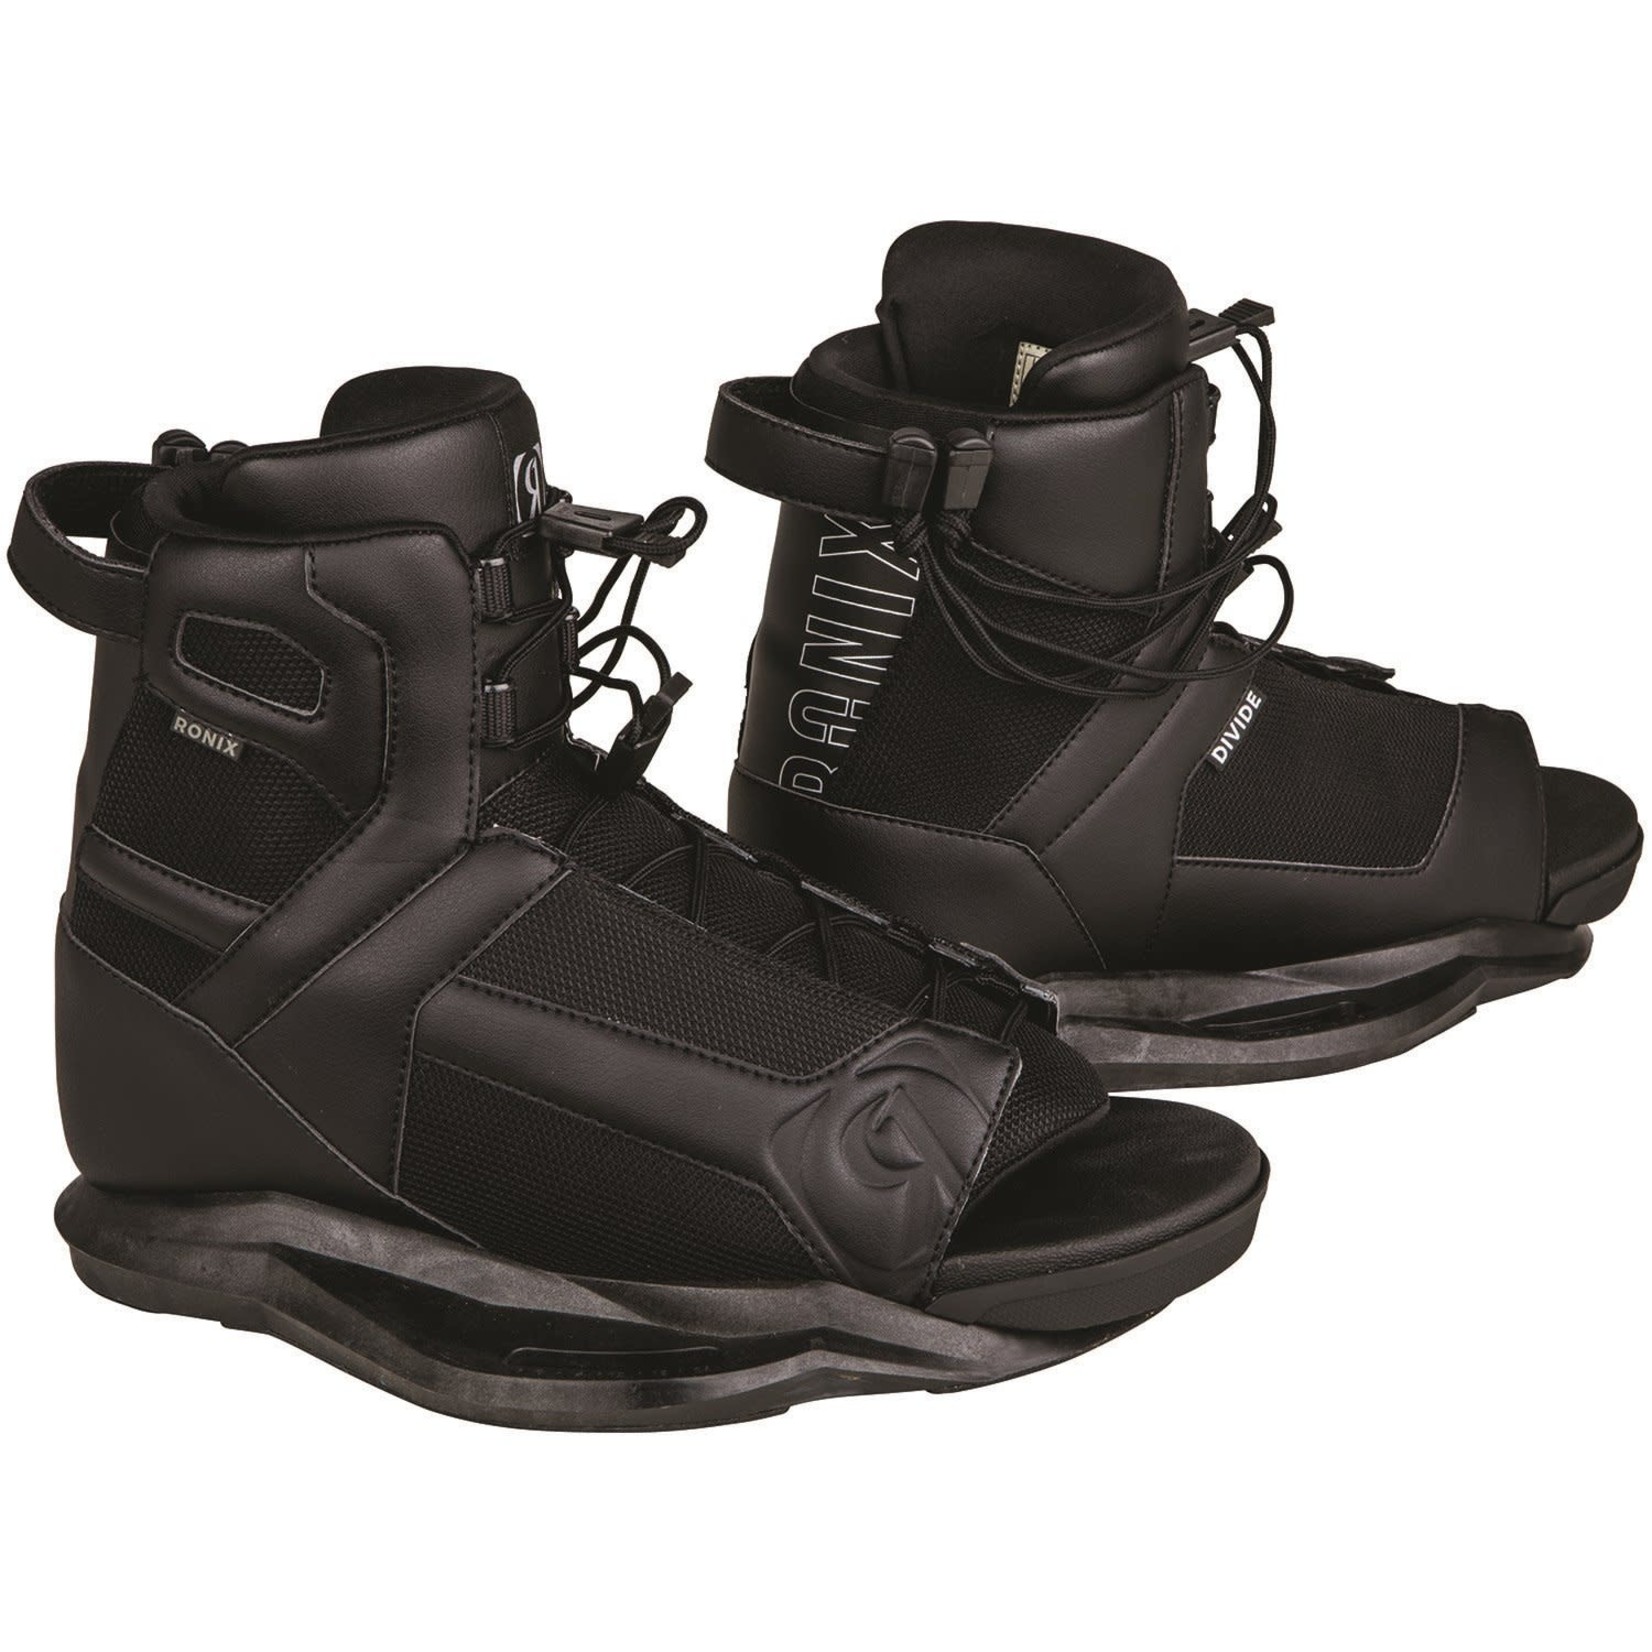 Ronix Divide s21 boot